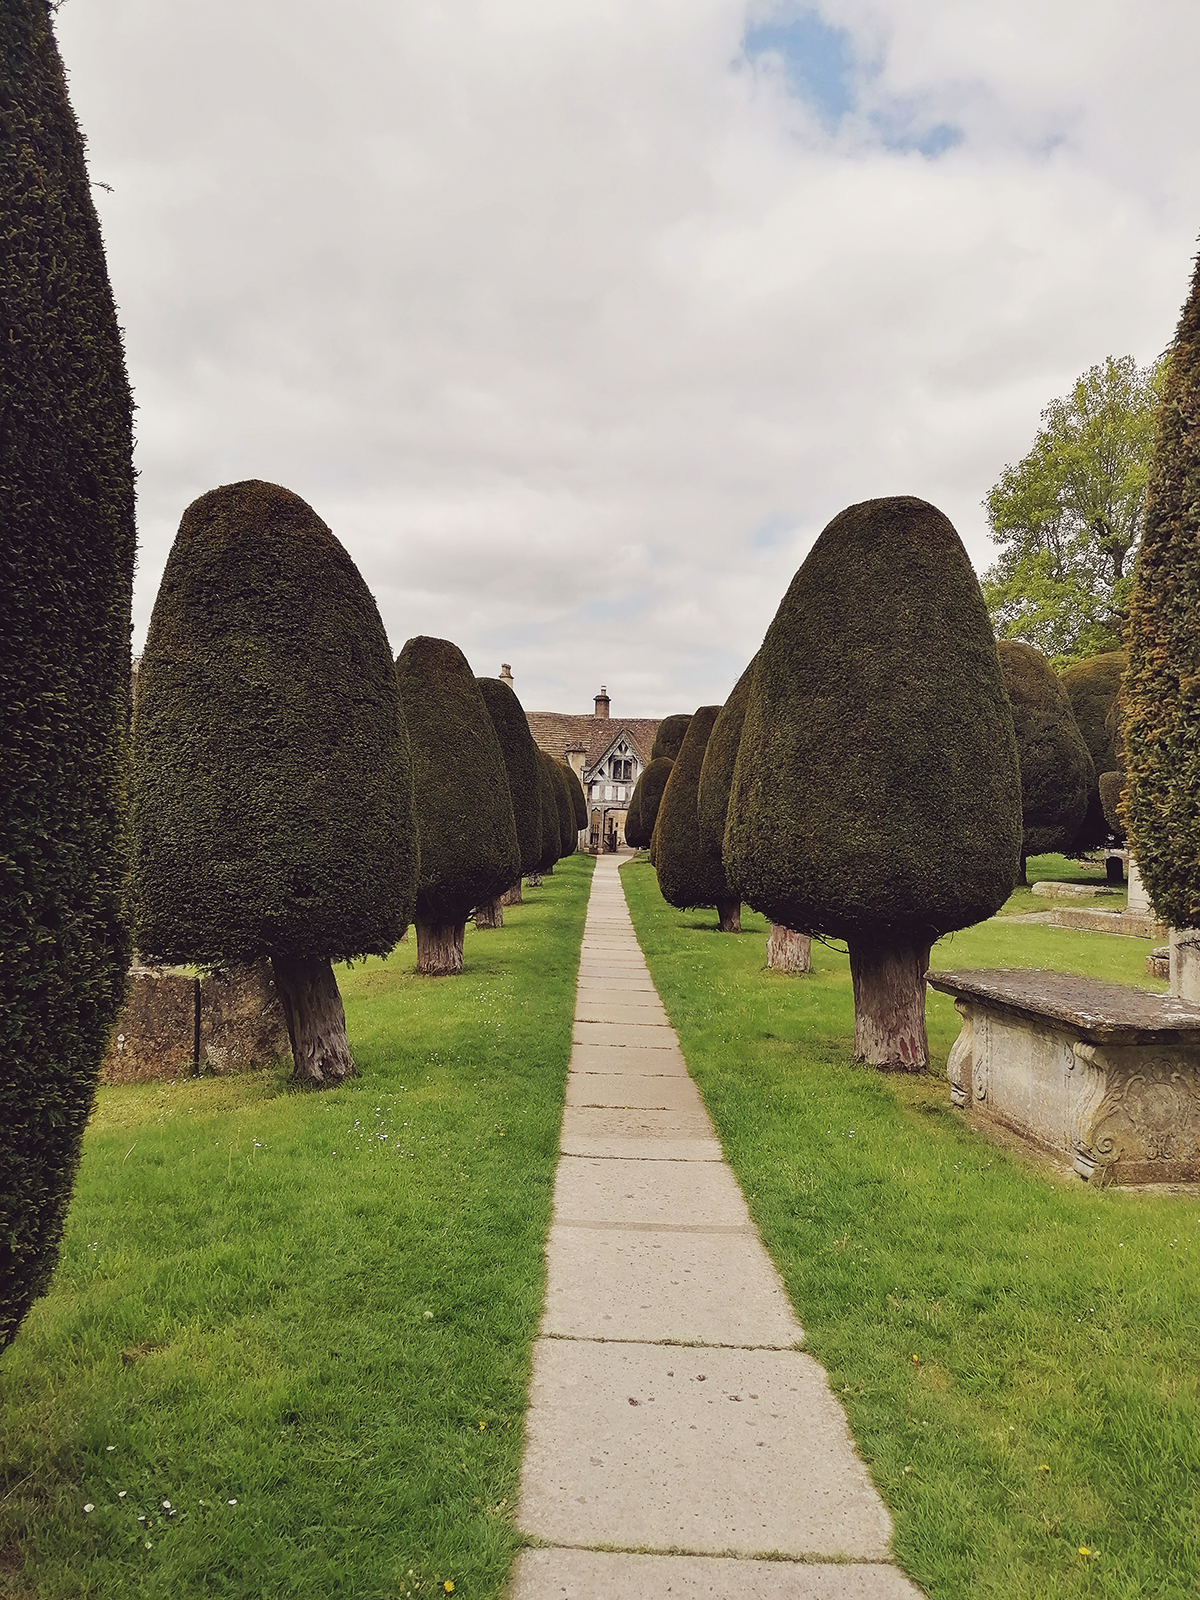 Yew trees in Painswick, Cotswolds